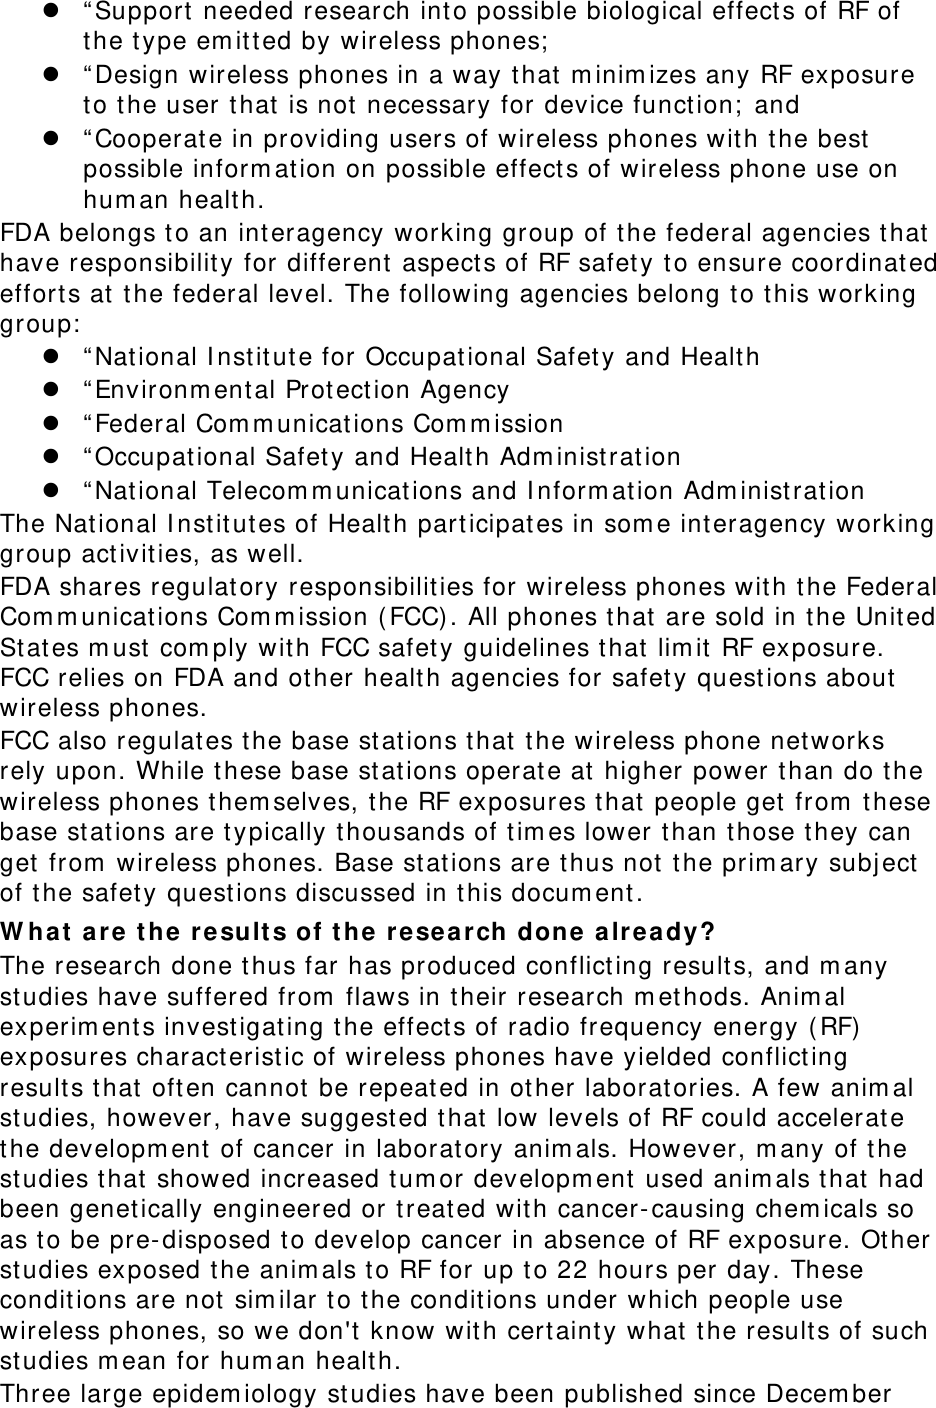  “ Support needed research int o possible biological effect s of RF of the t ype em it ted by wireless phones;   “ Design wireless phones in a way that m inim izes any RF exposure to the user that is not necessary for device funct ion;  and  “ Cooperat e in providing users of wireless phones with t he best  possible inform at ion on possible effect s of wireless phone use on hum an healt h. FDA belongs to an int eragency working group of the federal agencies that have responsibilit y for different aspect s of RF safet y to ensure coordinat ed effort s at  t he federal level. The following agencies belong t o t his working group:   “ Nat ional I nst it ut e for Occupat ional Safet y and Health  “ Environm ental Prot ect ion Agency  “ Federal Com m unicat ions Com m ission  “ Occupat ional Safet y and Health Adm inistrat ion  “ Nat ional Telecom m unicat ions and I nform at ion Adm inist ration The National I nstit ut es of Health participates in som e interagency working group act ivit ies, as well. FDA shares regulat ory responsibilit ies for wireless phones wit h t he Federal Com m unicat ions Com m ission (FCC). All phones t hat  are sold in t he Unit ed St at es m ust com ply wit h FCC safet y guidelines t hat  lim it  RF exposure. FCC relies on FDA and other health agencies for safet y quest ions about wireless phones. FCC also regulat es t he base st at ions t hat  the wireless phone networks rely upon. While these base st ations operat e at  higher power t han do the wireless phones t hem selves, t he RF exposures that people get from  these base stat ions are t ypically t housands of t im es lower than t hose t hey can get  from  wireless phones. Base st at ions are t hus not  t he prim ary subj ect  of the safet y quest ions discussed in t his docum ent. W hat a re t he r e sult s of t he research done already? The research done t hus far has produced conflicting result s, and m any studies have suffered from  flaws in their research m et hods. Anim al experim ents invest igat ing t he effect s of radio frequency energy ( RF)  exposures characterist ic of wireless phones have yielded conflict ing result s that  oft en cannot be repeat ed in ot her laboratories. A few anim al studies, however, have suggest ed t hat low levels of RF could accelerat e the developm ent  of cancer in laborat ory anim als. However, m any of t he studies that showed increased tum or developm ent used anim als t hat  had been genet ically engineered or t reat ed wit h cancer-causing chem icals so as t o be pre- disposed t o develop cancer in absence of RF exposure. Ot her studies exposed t he anim als to RF for up t o 22 hours per day. These conditions are not  sim ilar to the condit ions under which people use wireless phones, so we don&apos;t know wit h certainty what t he result s of such studies m ean for hum an healt h. Three large epidem iology st udies have been published since Decem ber 